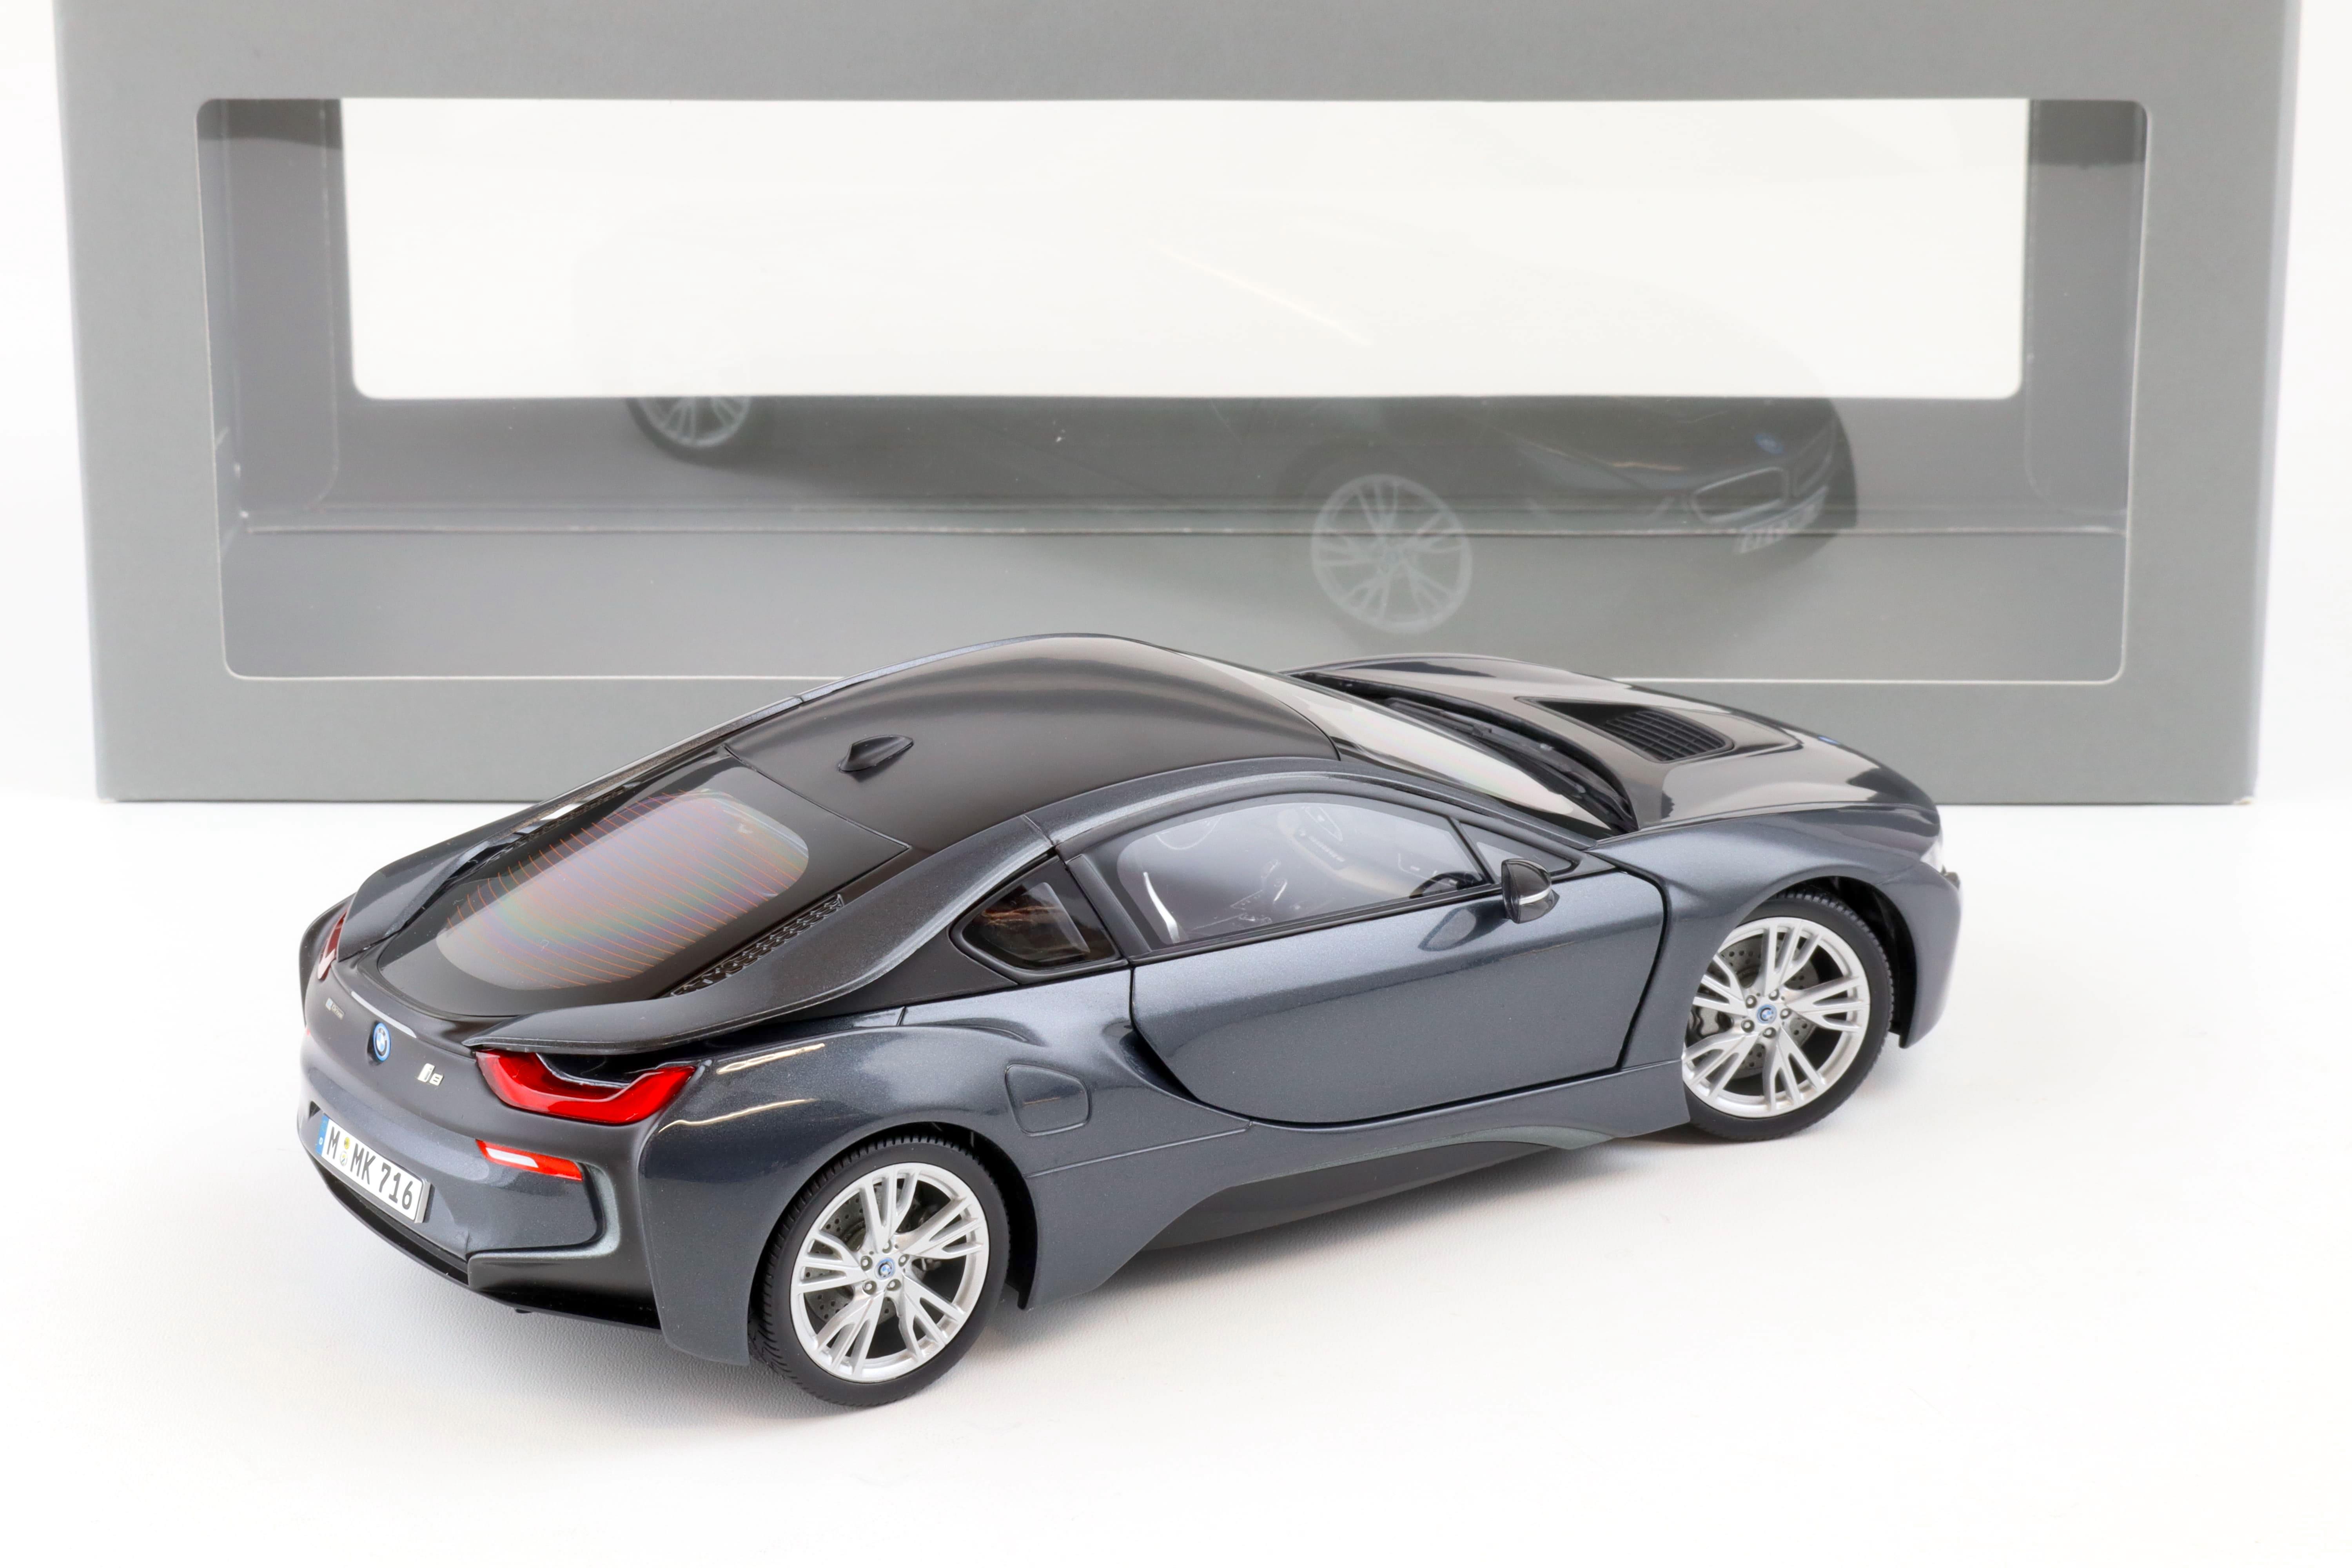 1:18 Paragon 2013 BMW i8 Coupe Sophisto grey and frozen grey